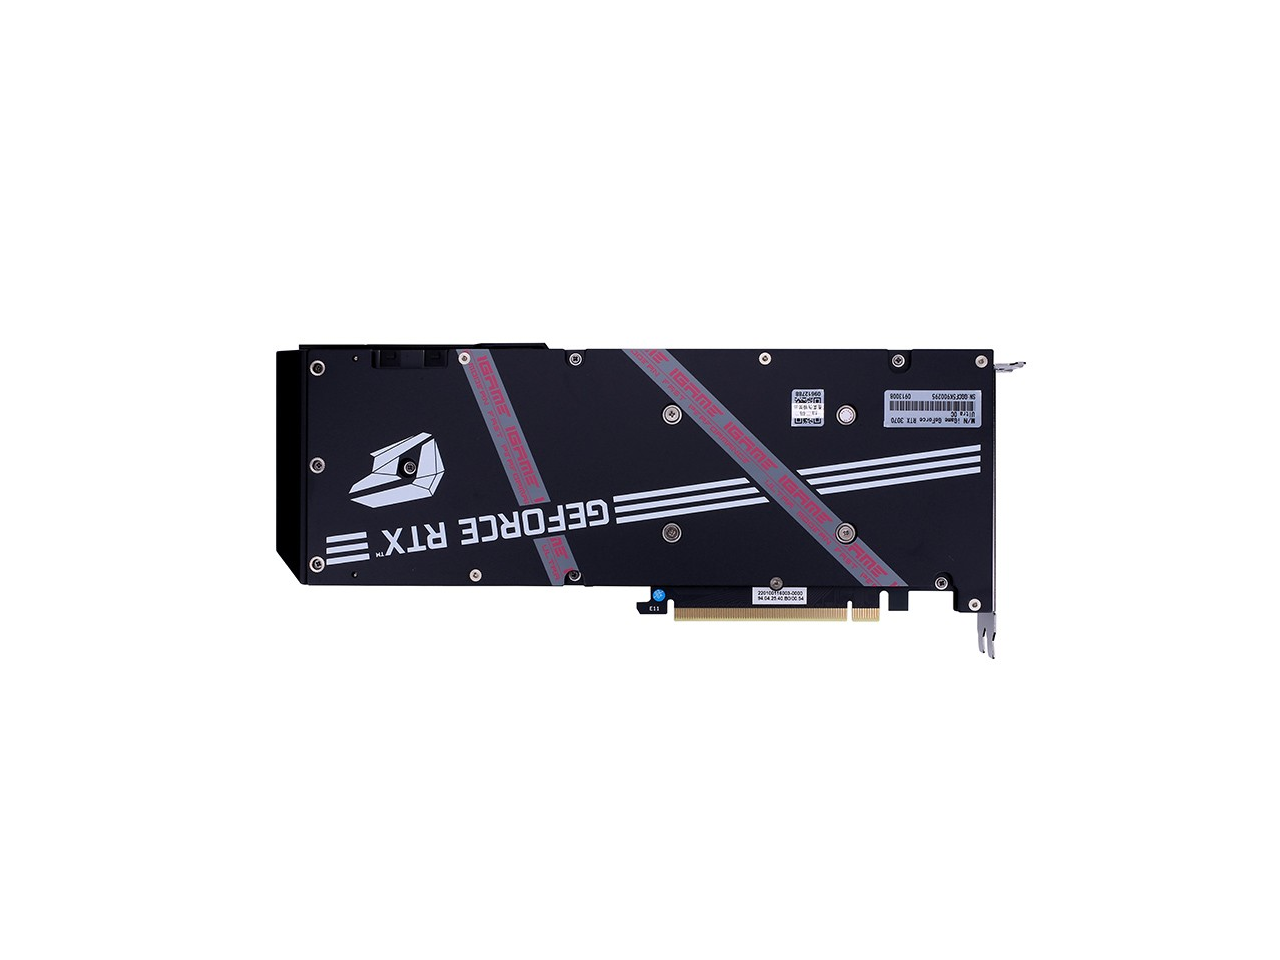 Colorful IGAME GEFORCE RTX 3080 Ultra OC 10g-v 10gb. RTX 3070 IGAME. RTX 3070 colorful. GEFORCE RTX 3070 Ultra w OC 8g. Colorful igame 3070